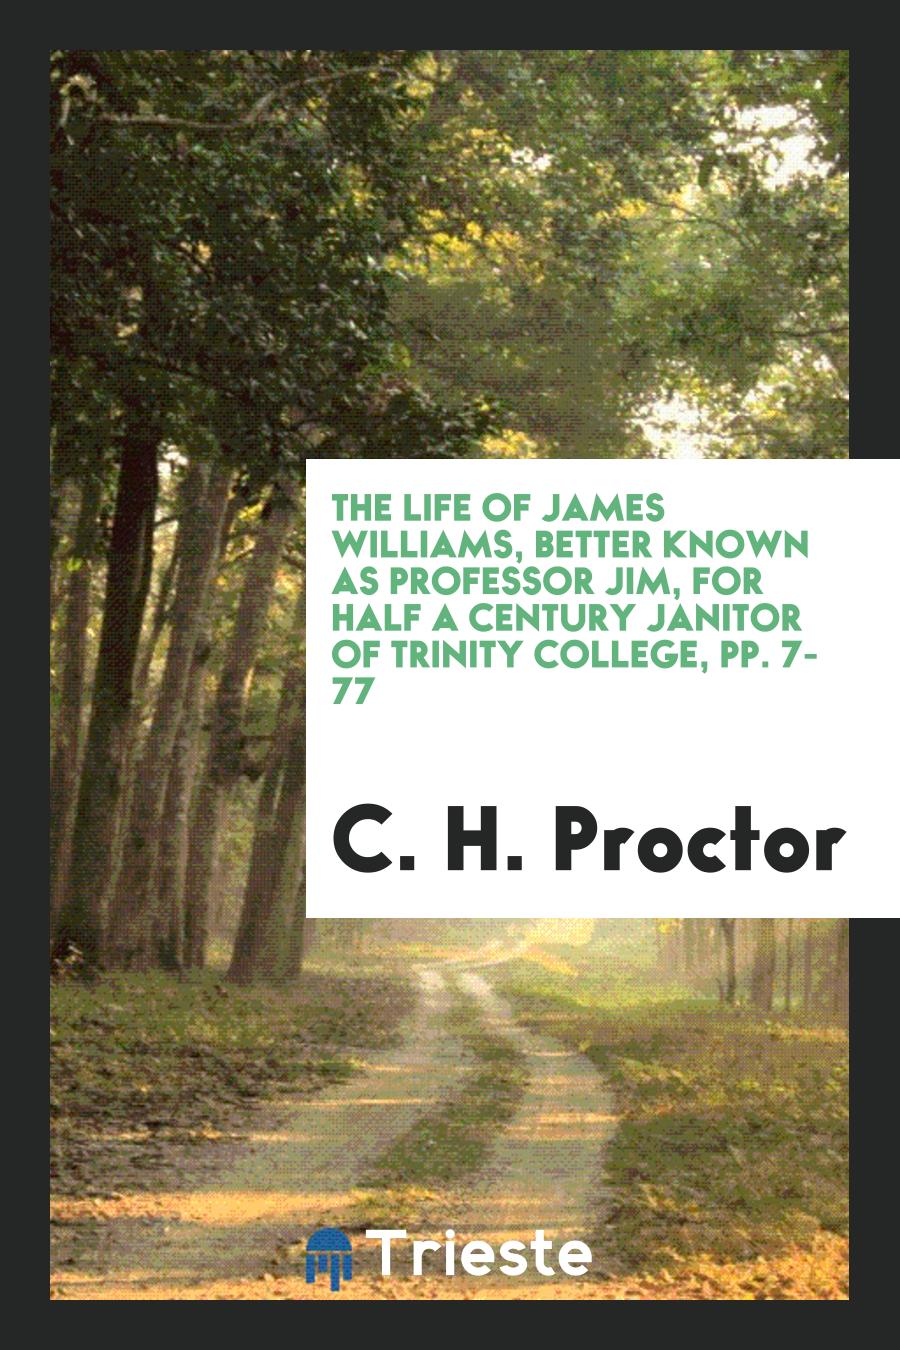 The Life of James Williams, Better Known as Professor Jim, for Half a Century Janitor of Trinity College, pp. 7-77